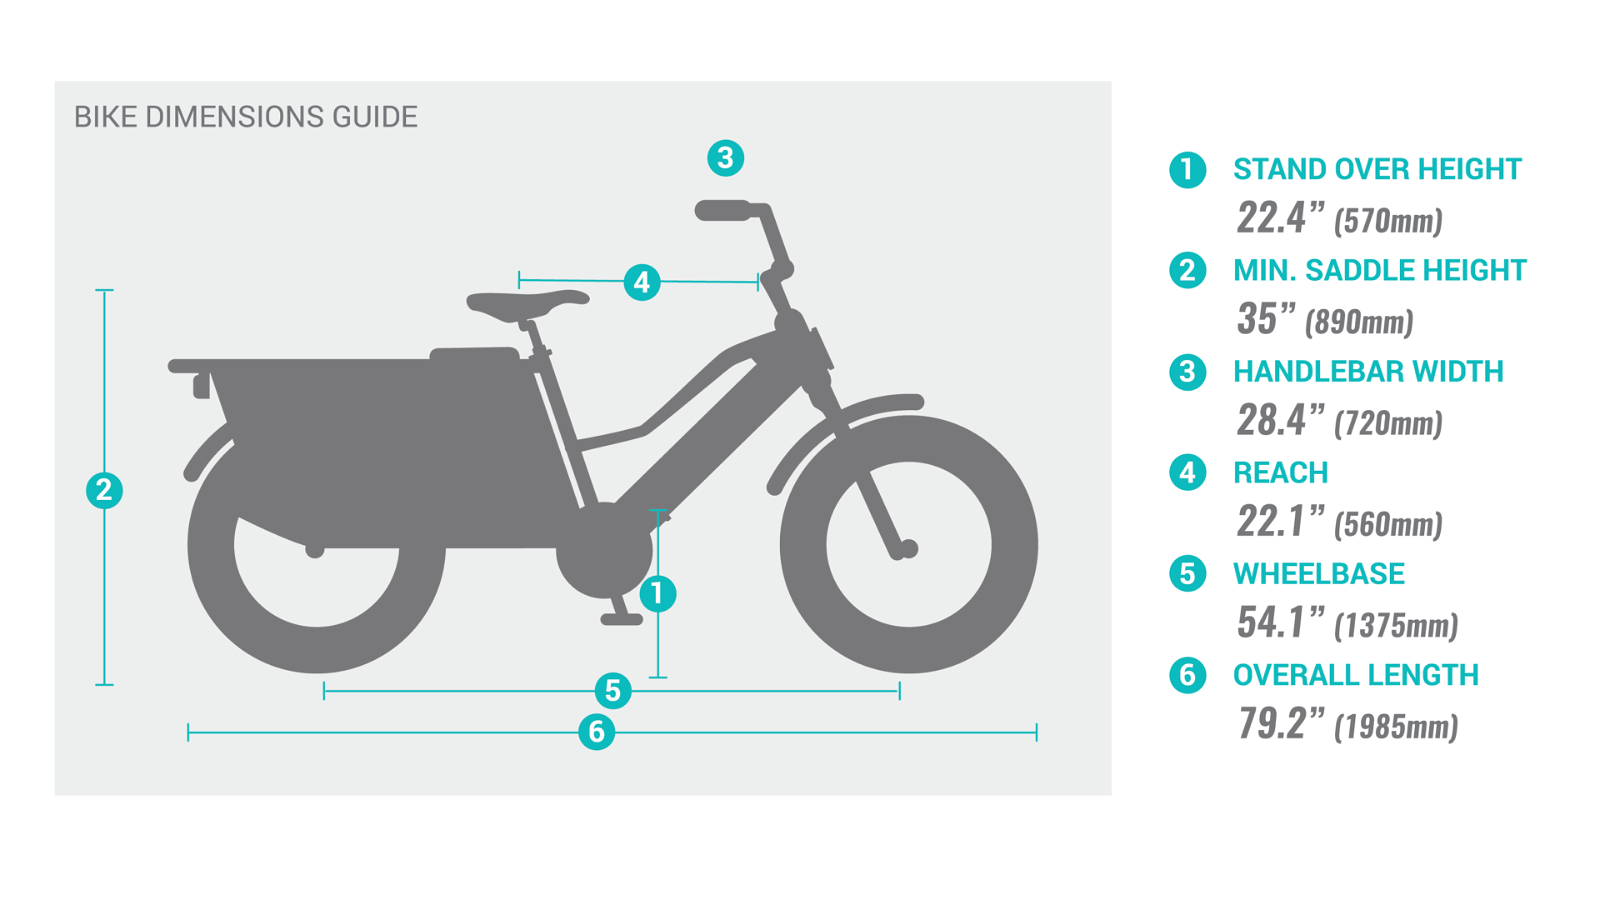 Pedego- Illustration of a CARGO with dimensions labeled, including stand over height, saddle height, handlebar width, reach, wheelbase, and overall length.